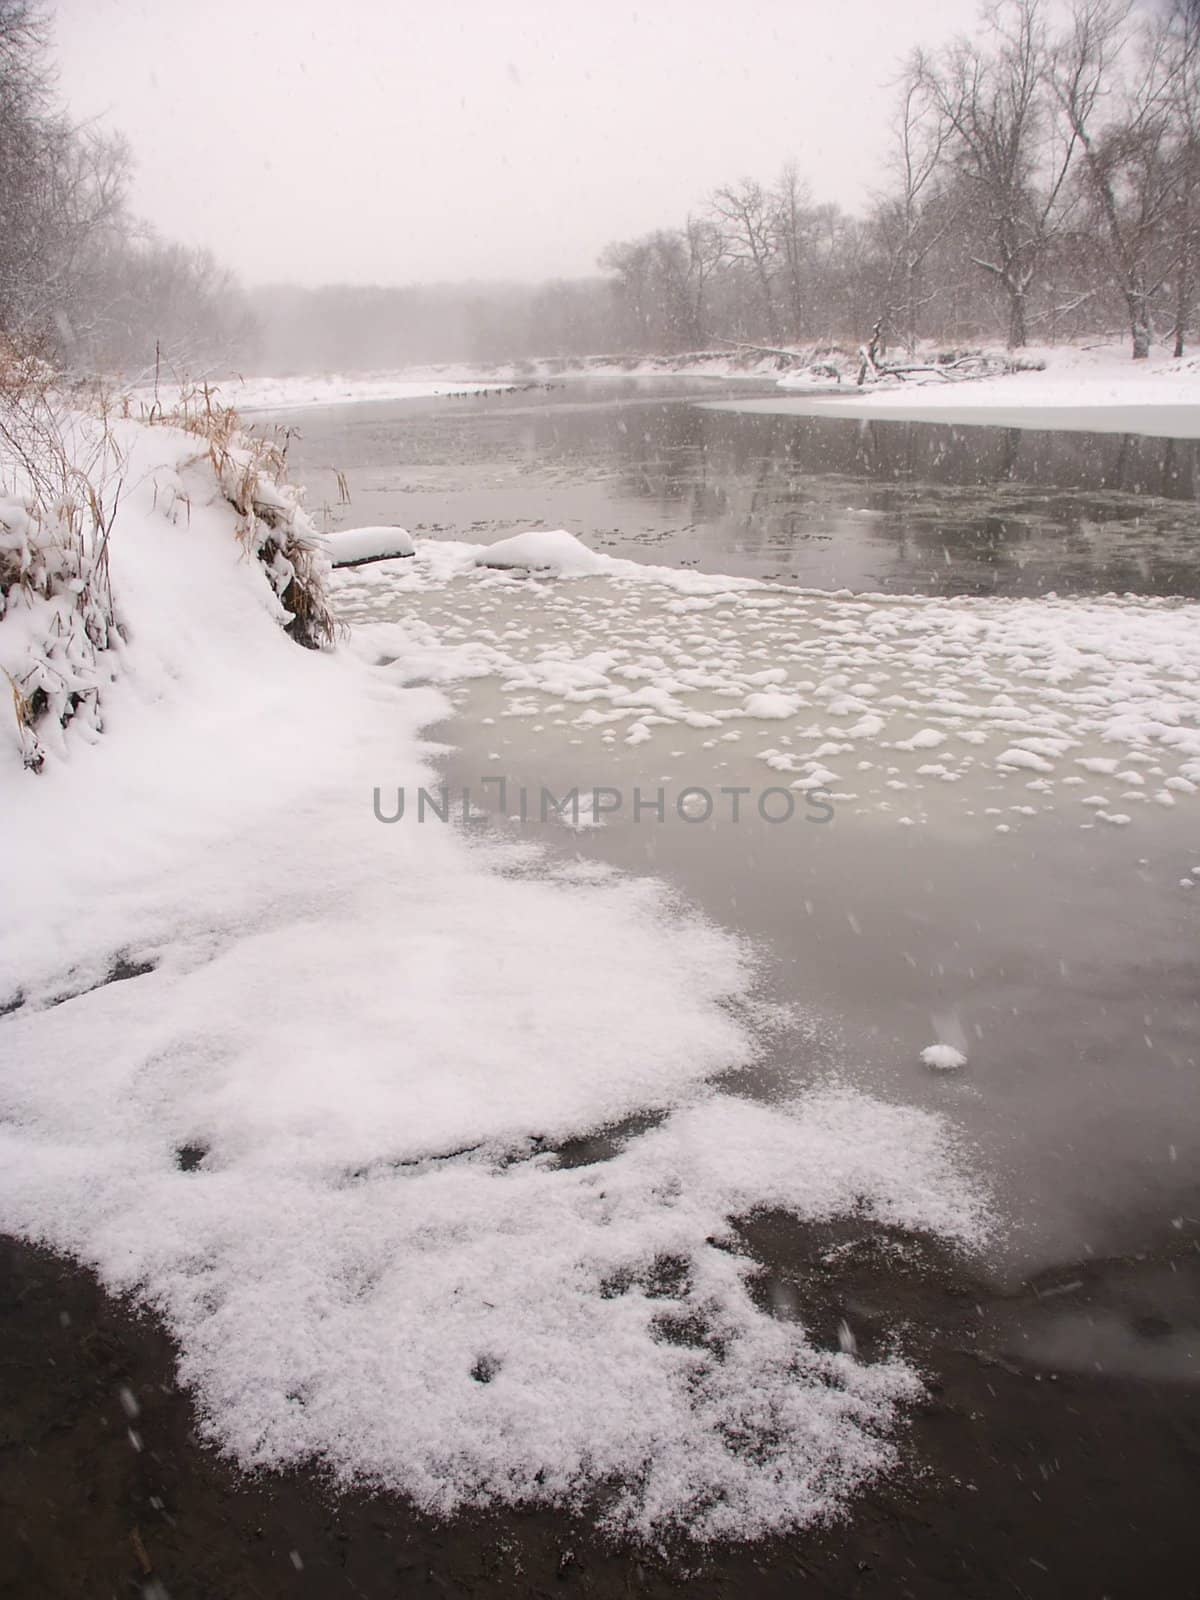 Snow falls along the Kishwaukee River on a cold winter morning at Blackhawk Springs Forest Preserve in northern Illinois.